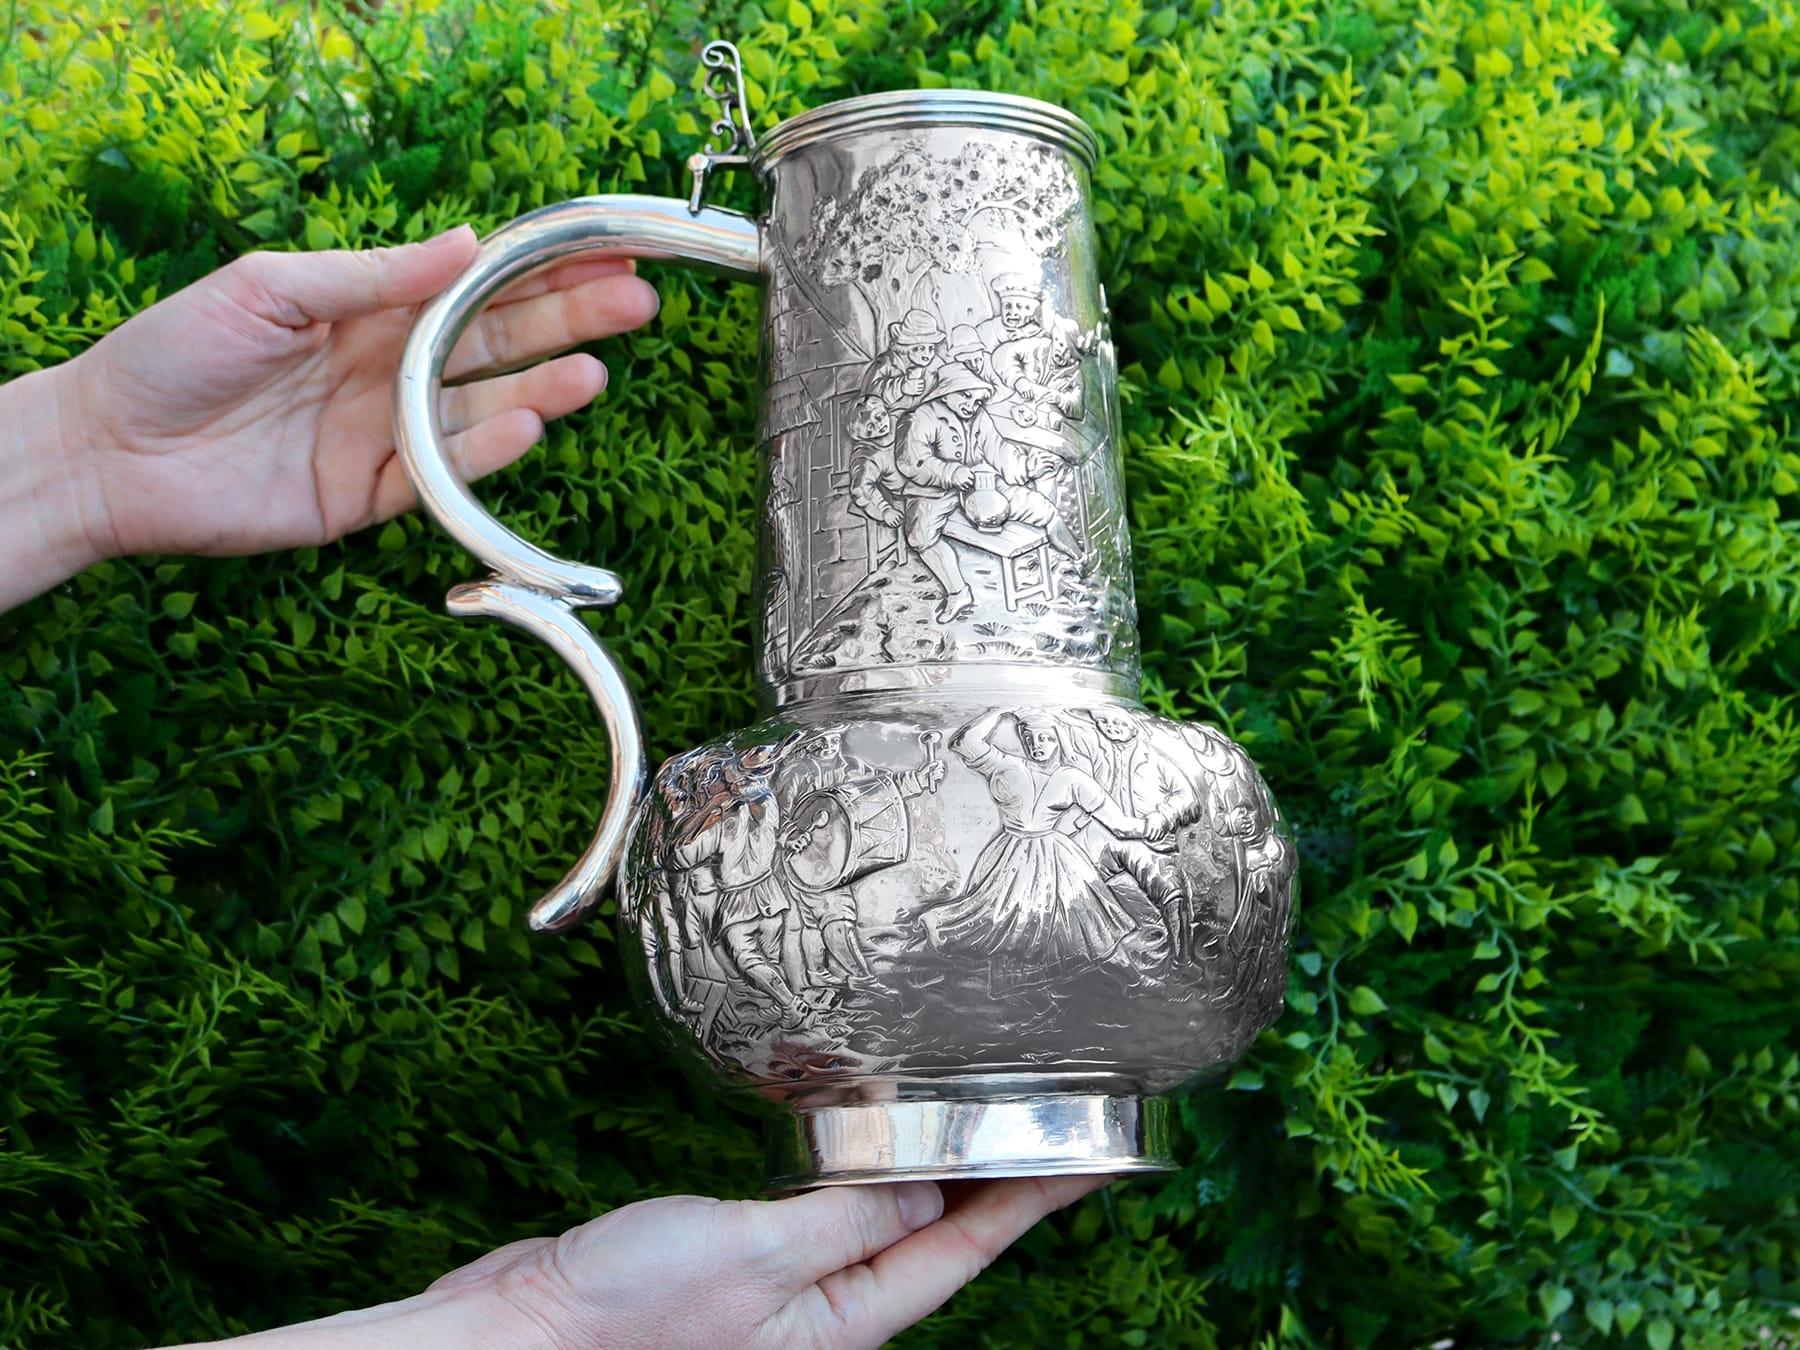 This exceptional antique German silver flagon has a globular body onto a circular spreading foot.

The surface of this German flagon is embellished with exceptional chased decoration depicting figures drinking, conversing and supporting each other